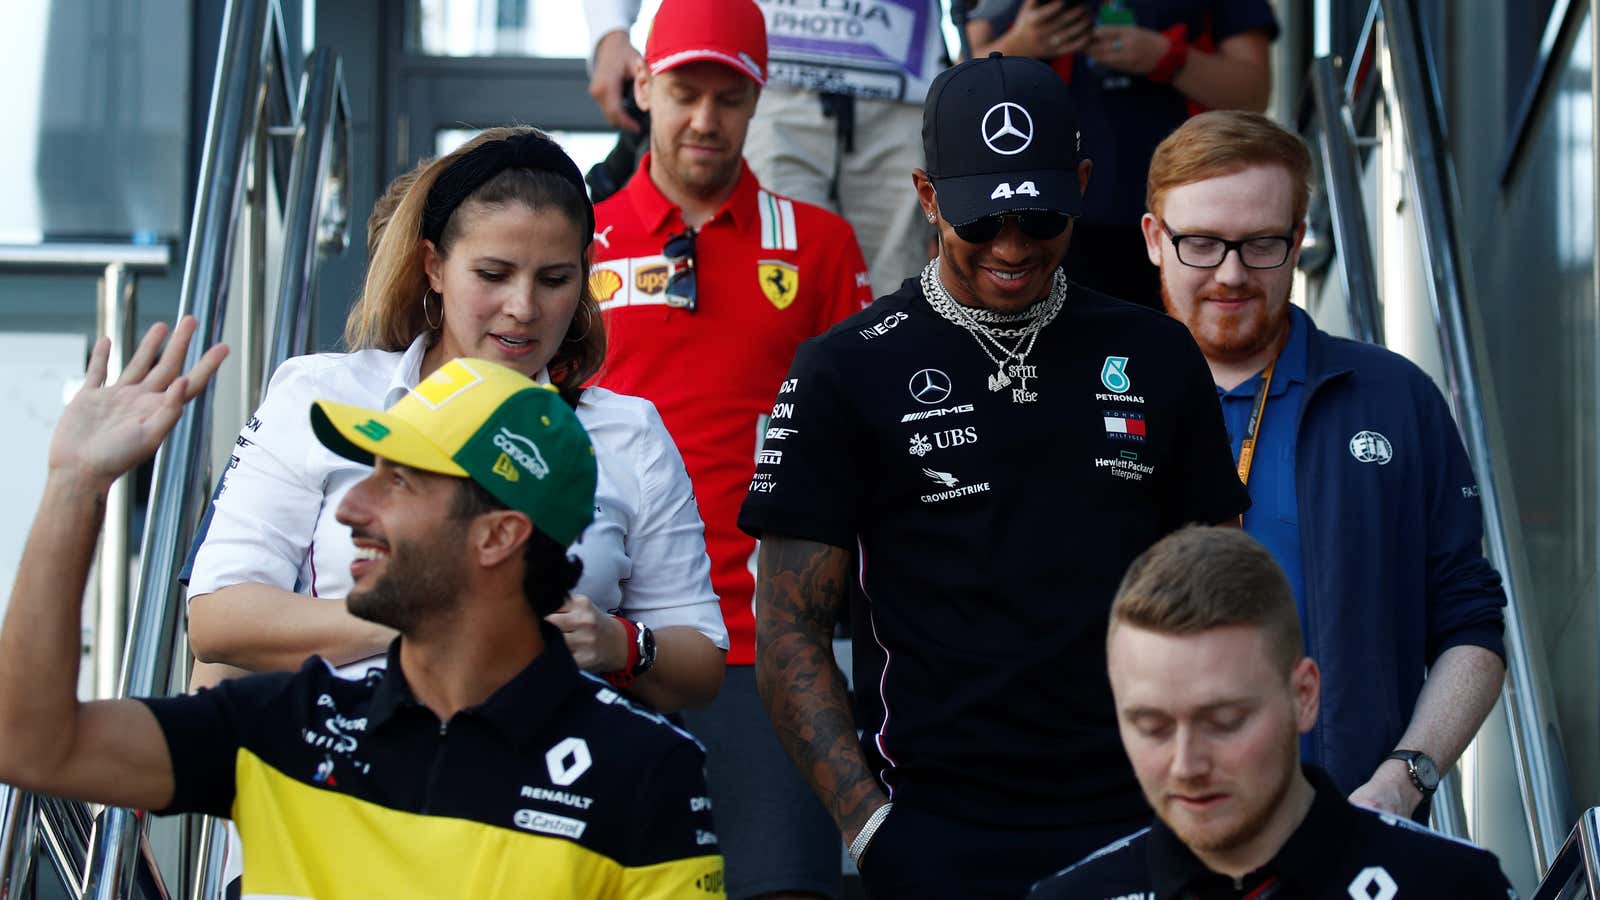 Mercedes driver Lewis Hamilton said at the press conference before the Australian Grand Prix: “I am very, very surprised that we are here.”